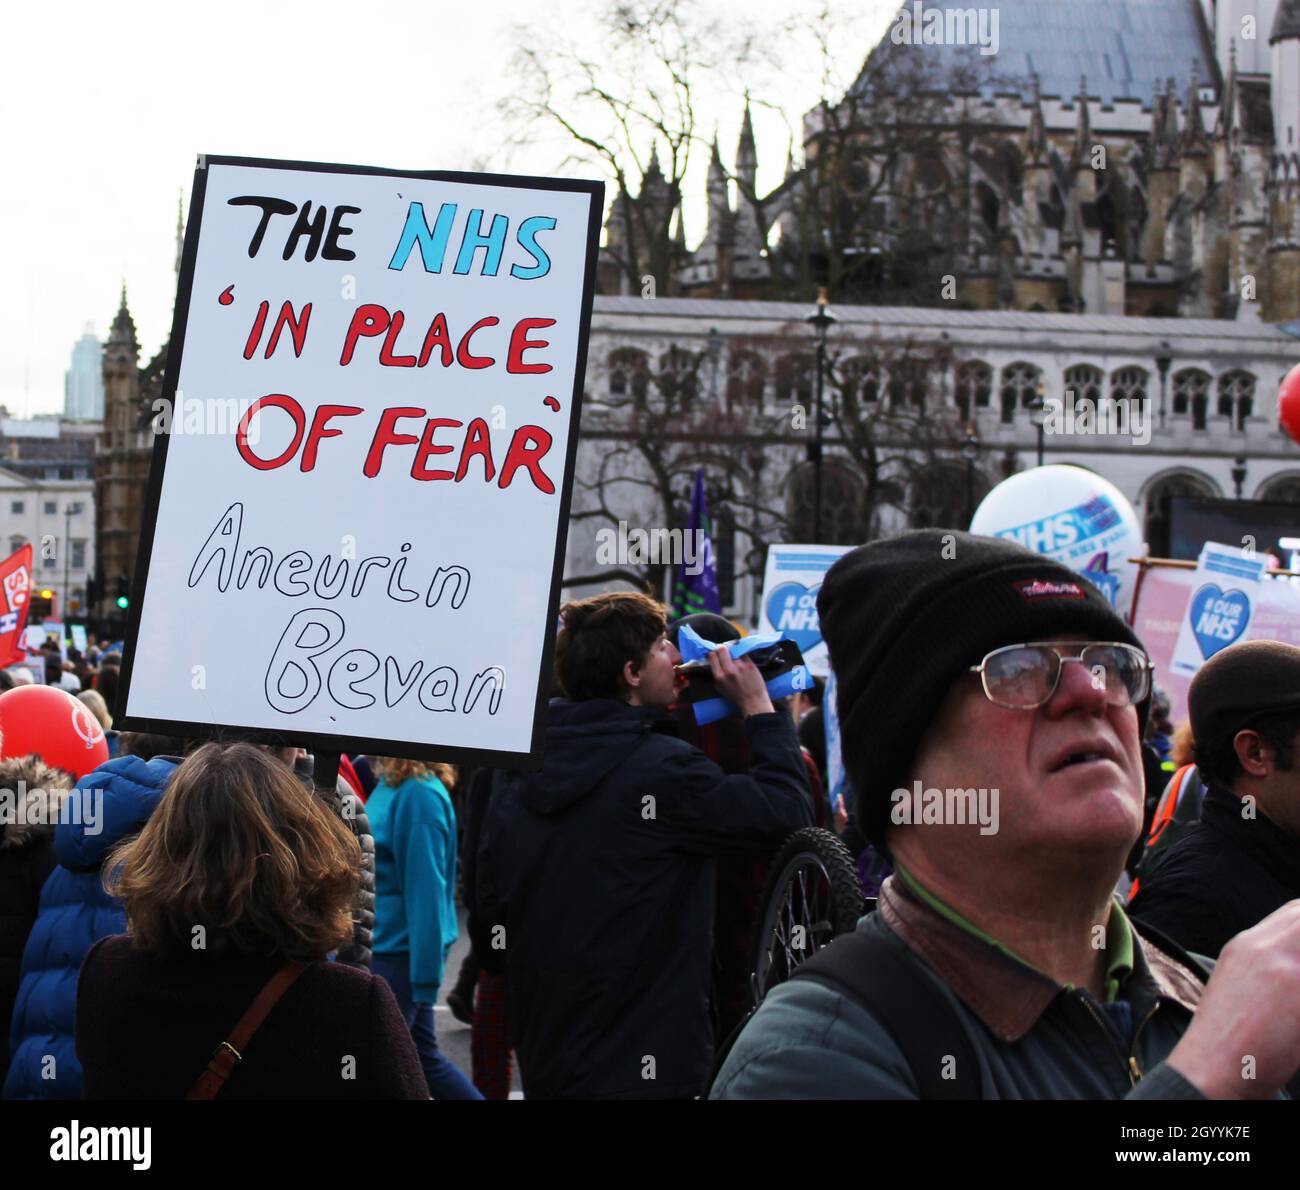 Save Our NHS march and demonstration in London - Mar 2017 Stock Photo